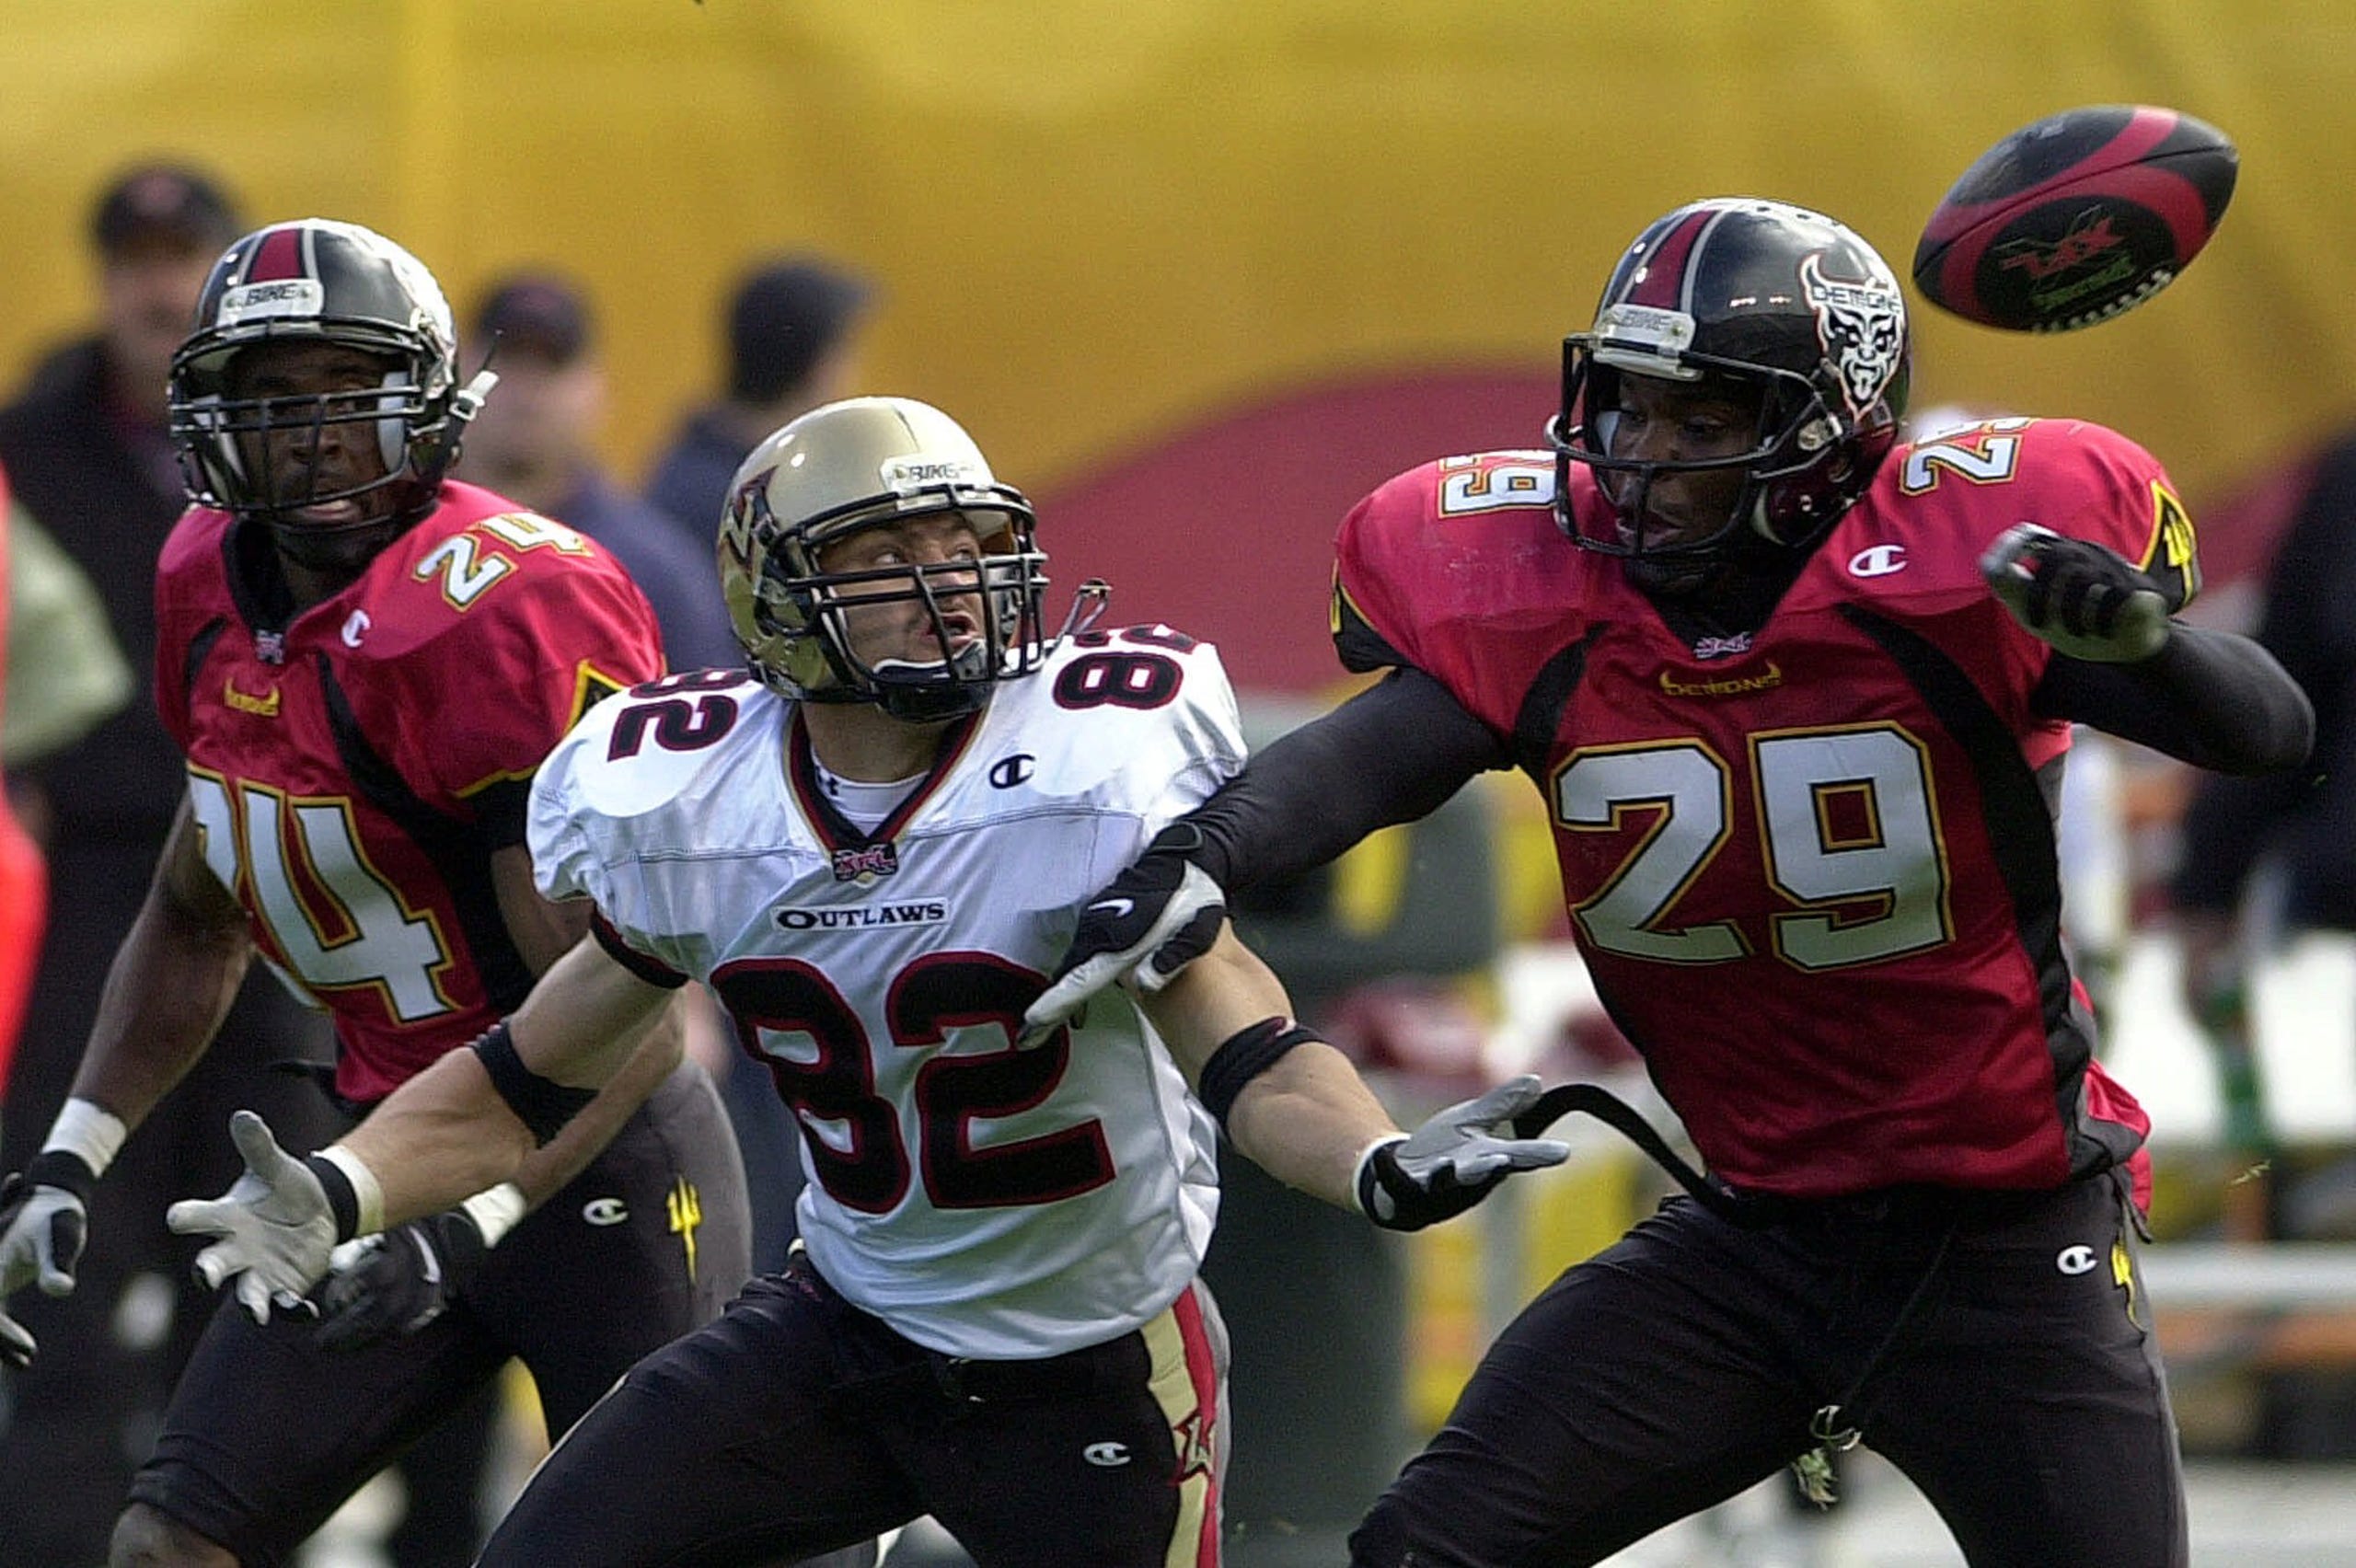 The San Francisco Demons' Terrance Joseph (29) breaks up a pass intended for Las Vegas Outlaws wide receiver Mike Furrey (82) in an XFL game in 2001.